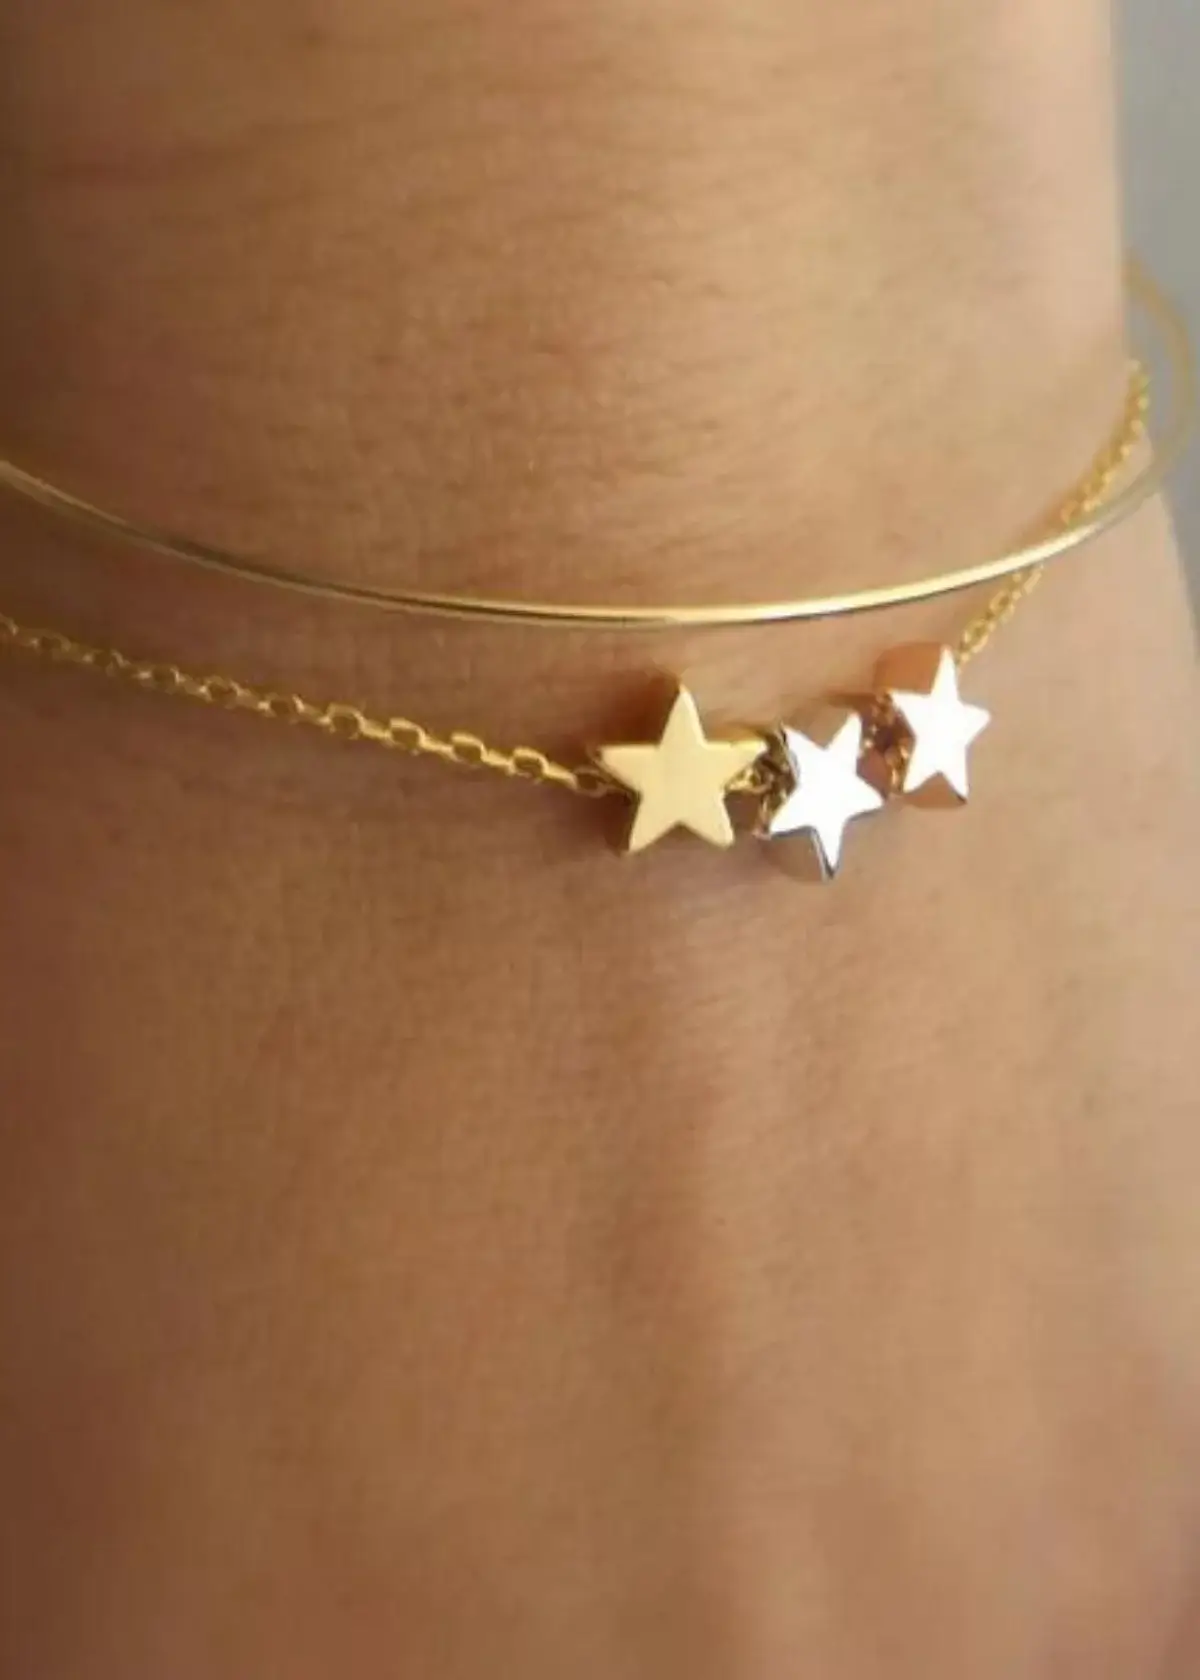 How many stars are typically featured on a star bracelet?